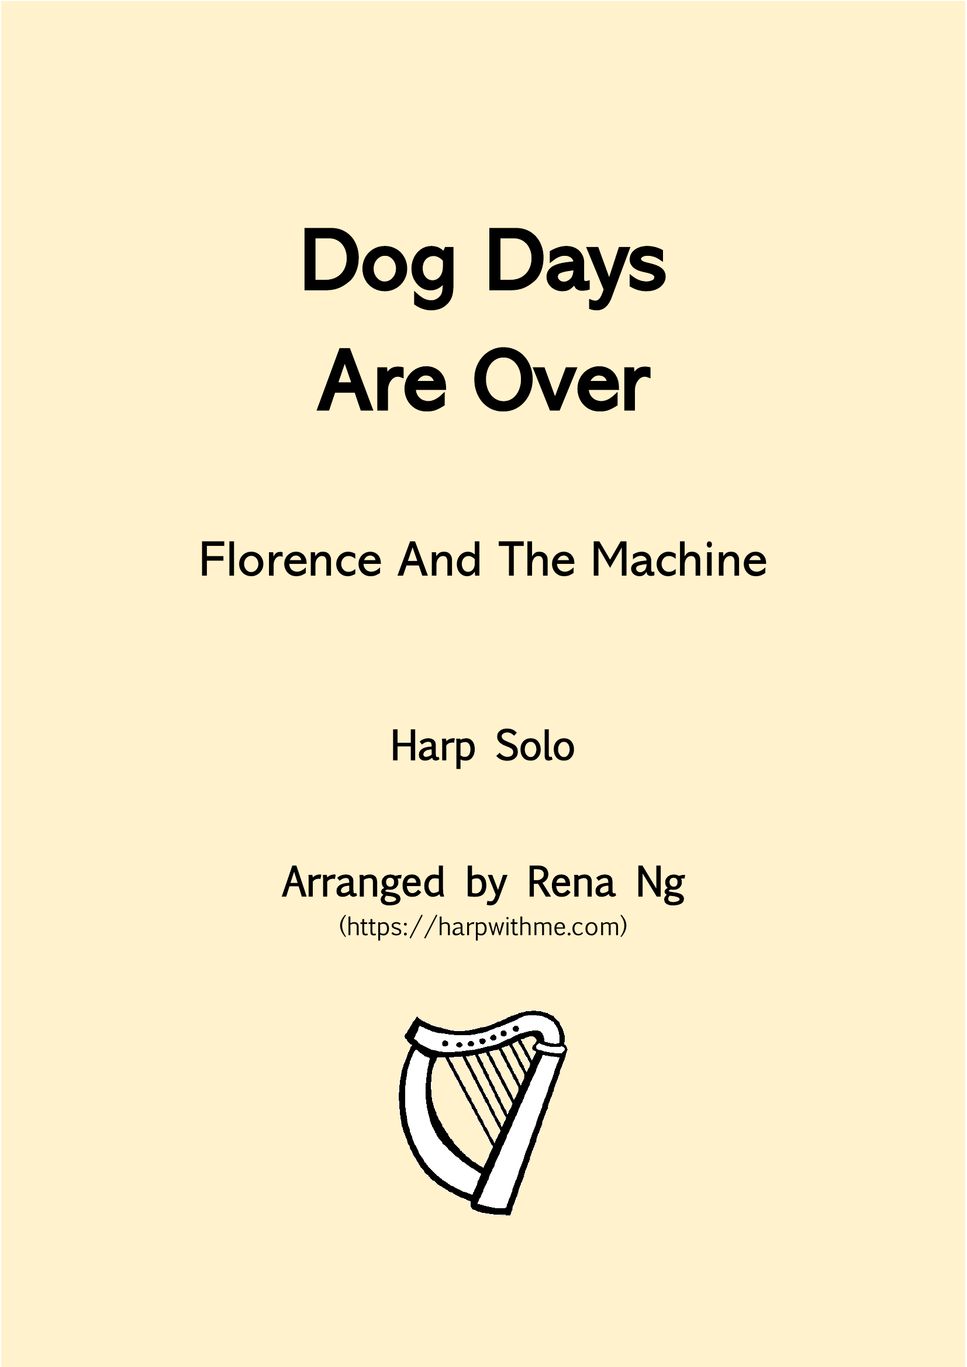 Florence and the Machine - Dog Days Are Over  (Harp Solo) - Intermediate by Harp With Me